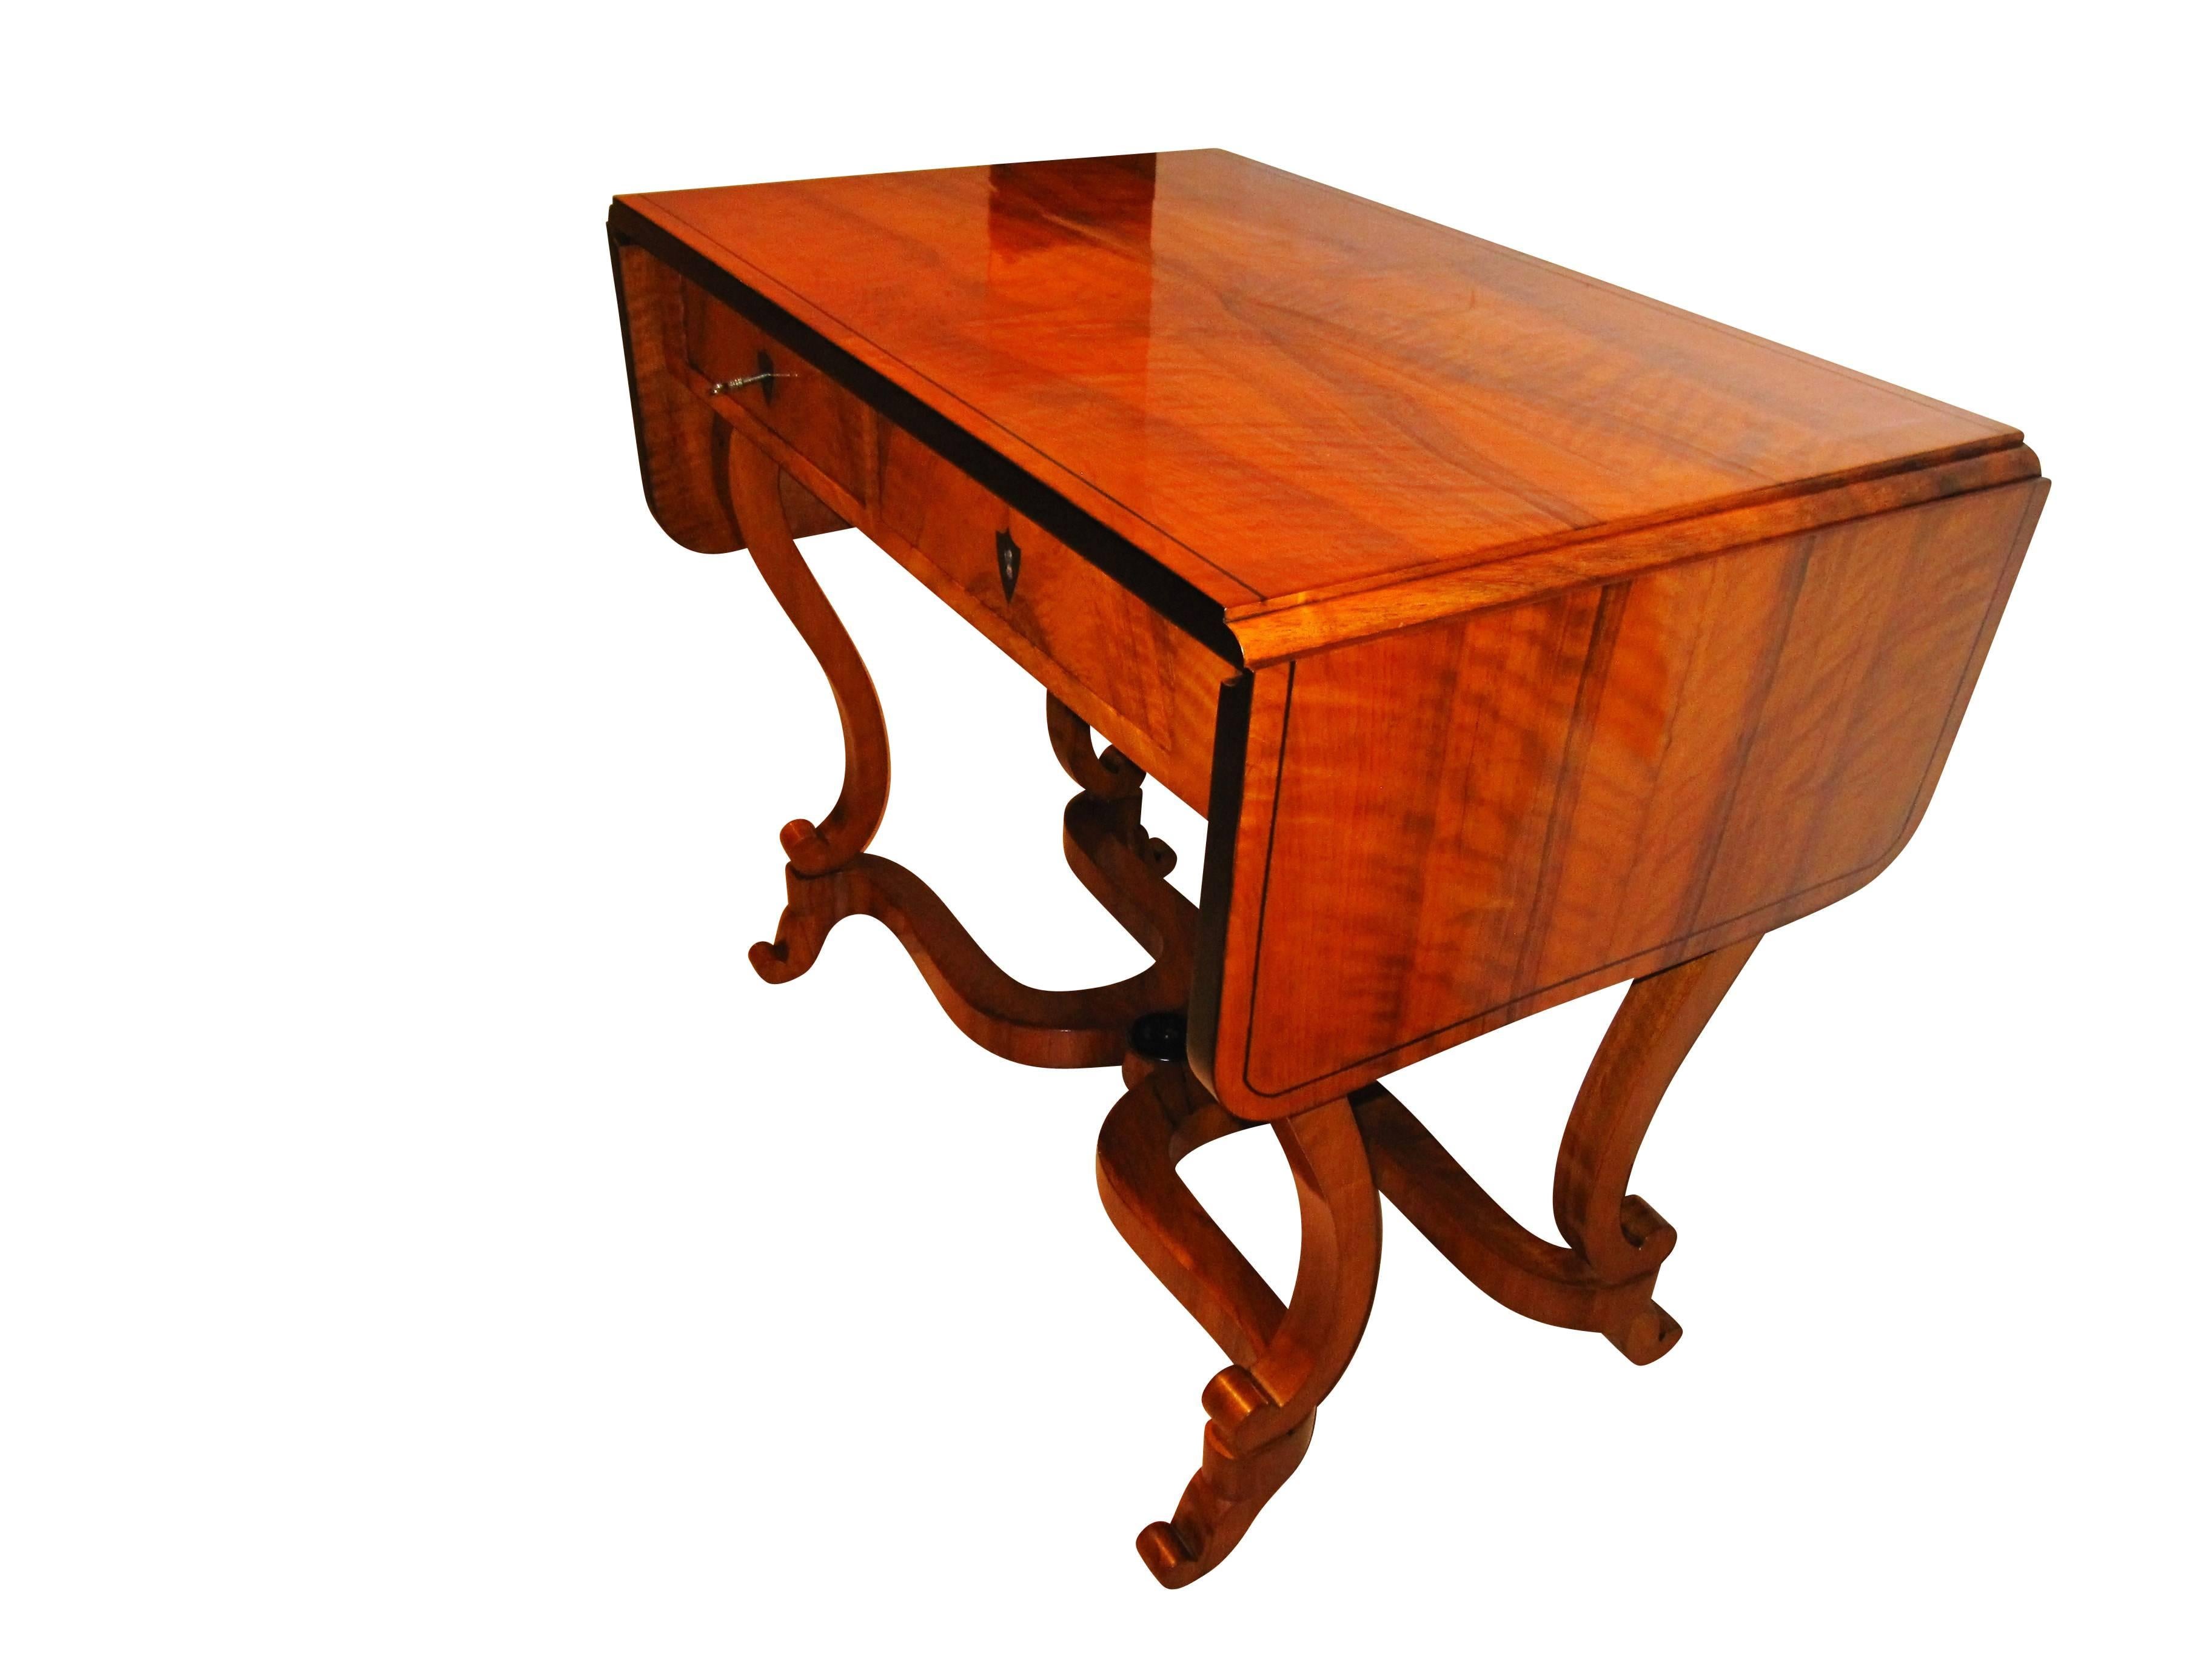 Very special and rare Biedermeier desk from South Germany, circa 1830. The desk is made from a beautiful book-matched walnut veneer and solid wood and has been hand-polished with shellac. The legs are made in form of a Lyra. It has two drawers at